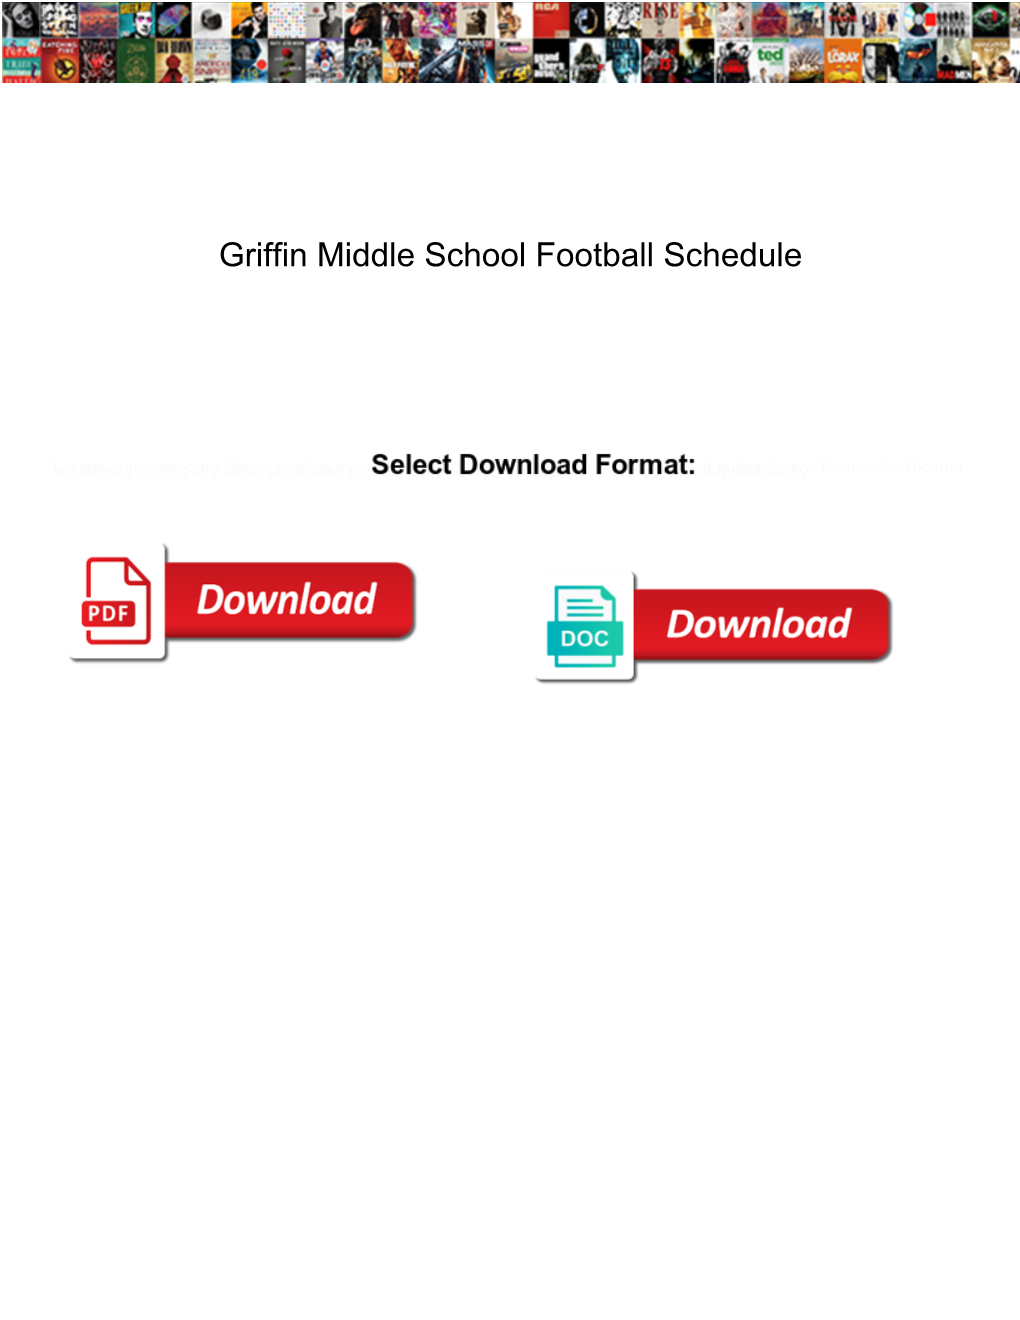 Griffin Middle School Football Schedule